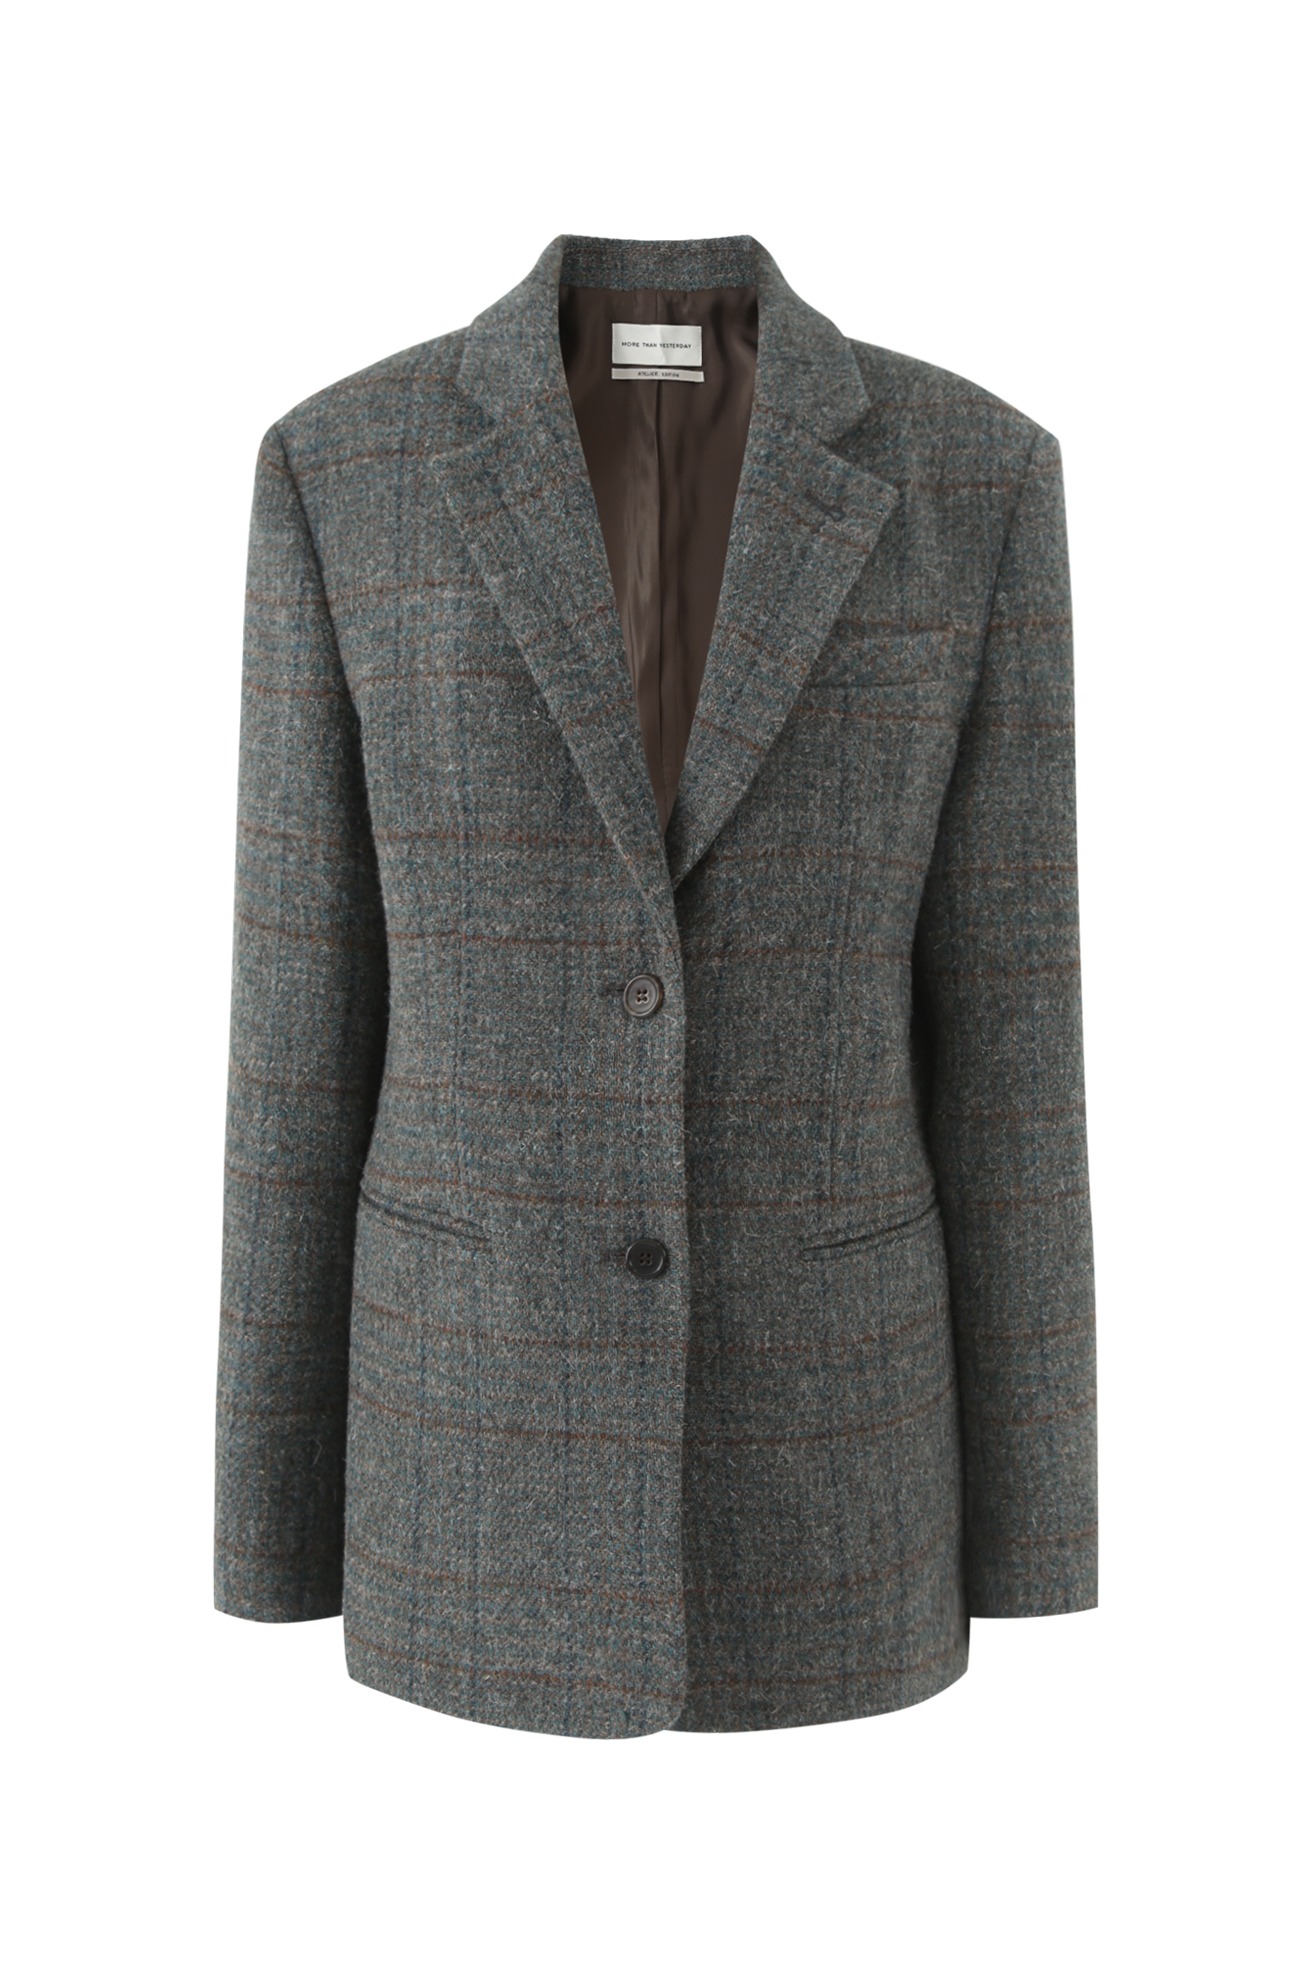 WOOL JACKET WITH SUEDE ELBOW PATCH (KHAKI) ATELIER EDITION 